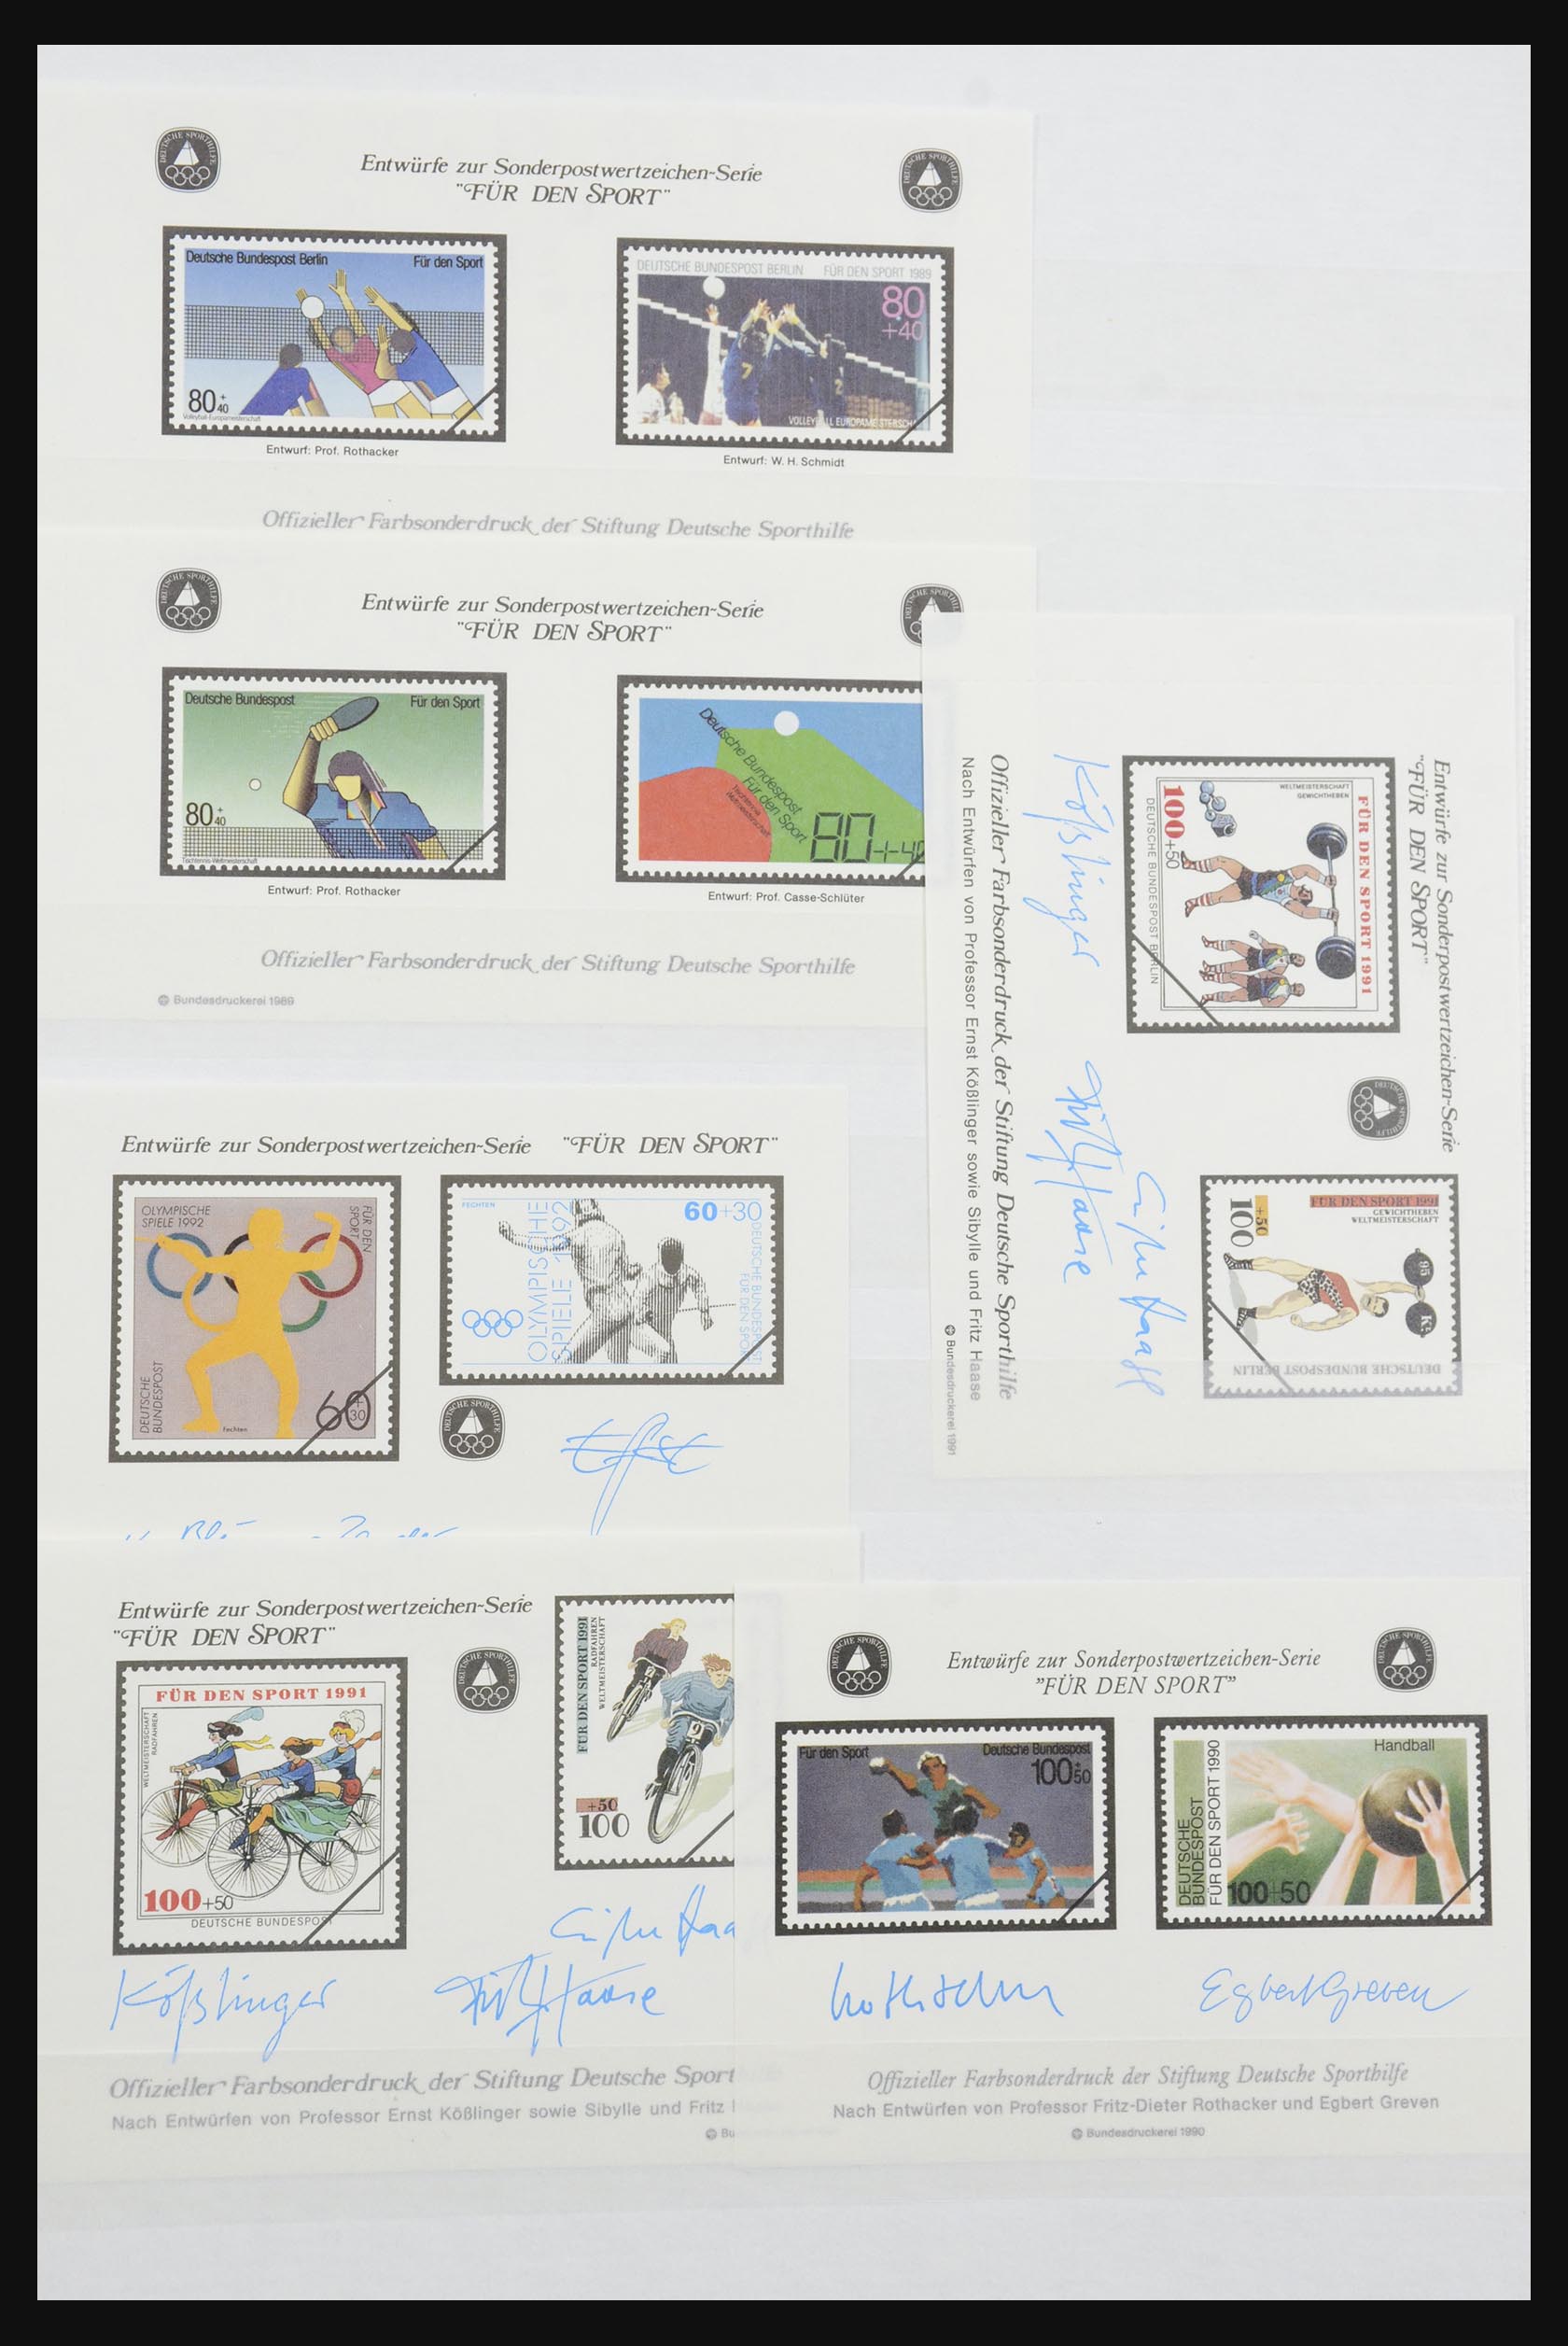 32050 012 - 32050 Bundespost special sheets 1980-2010.